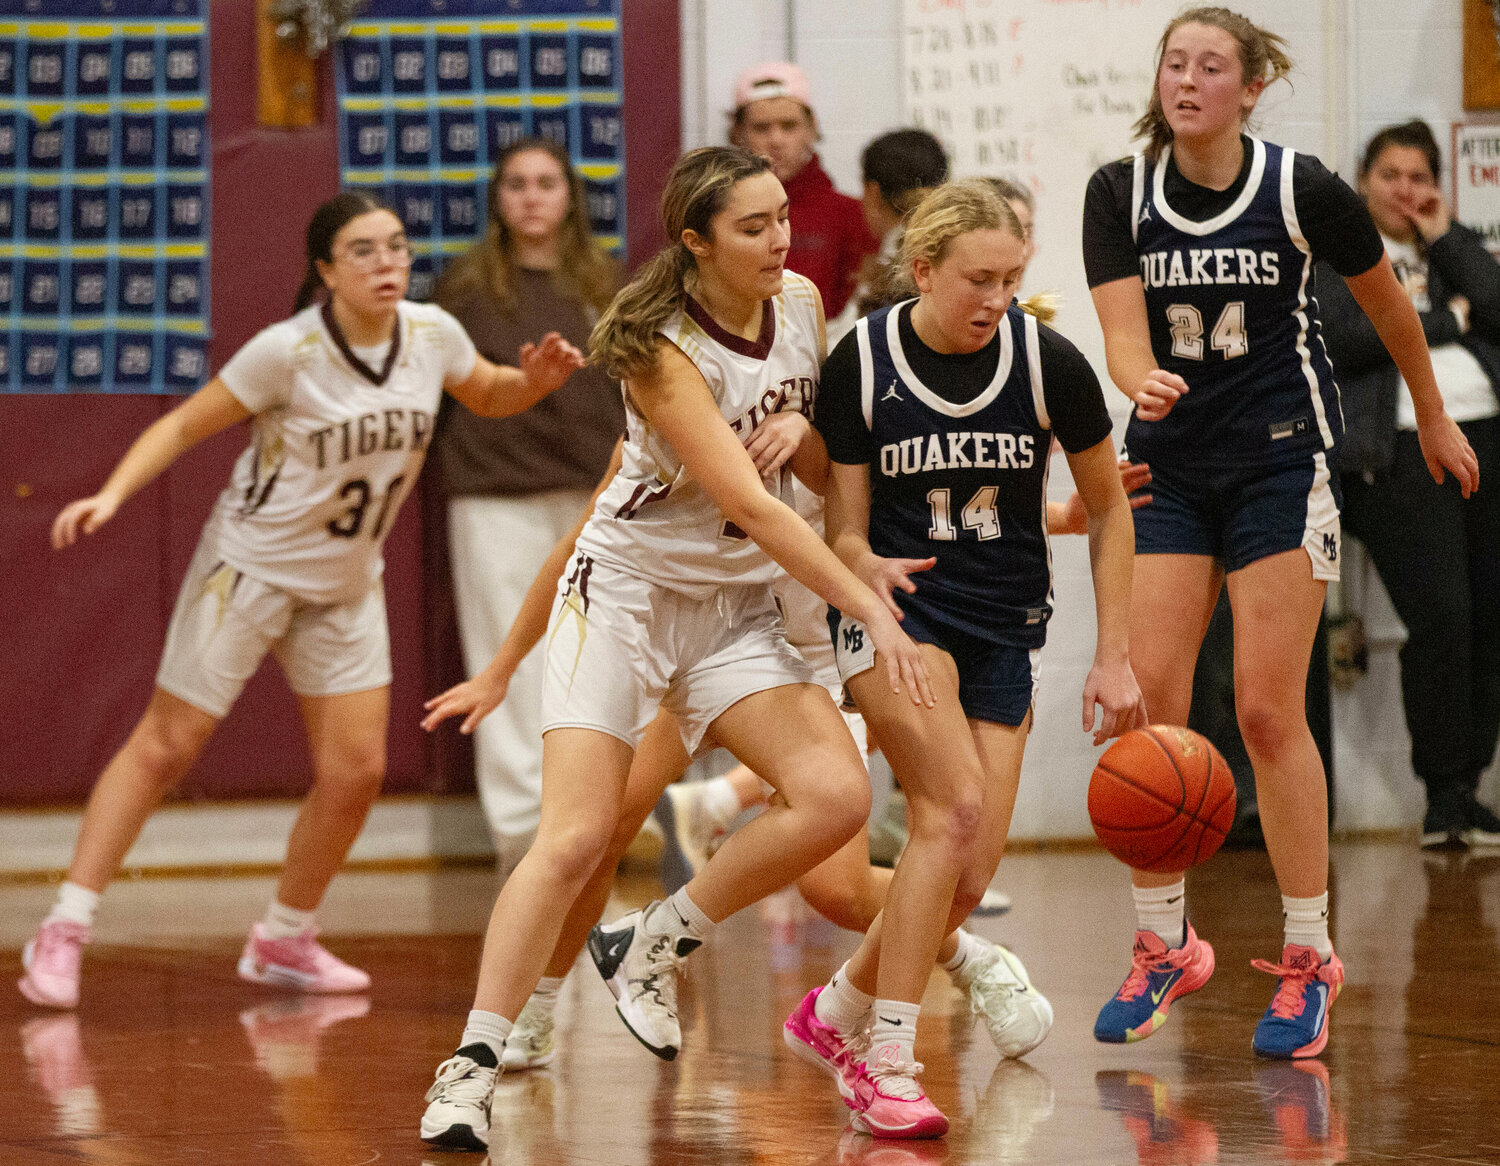 Cami Oliveira (left) looks on while teammate Laney LePage (middle) makes a steal during the game. 